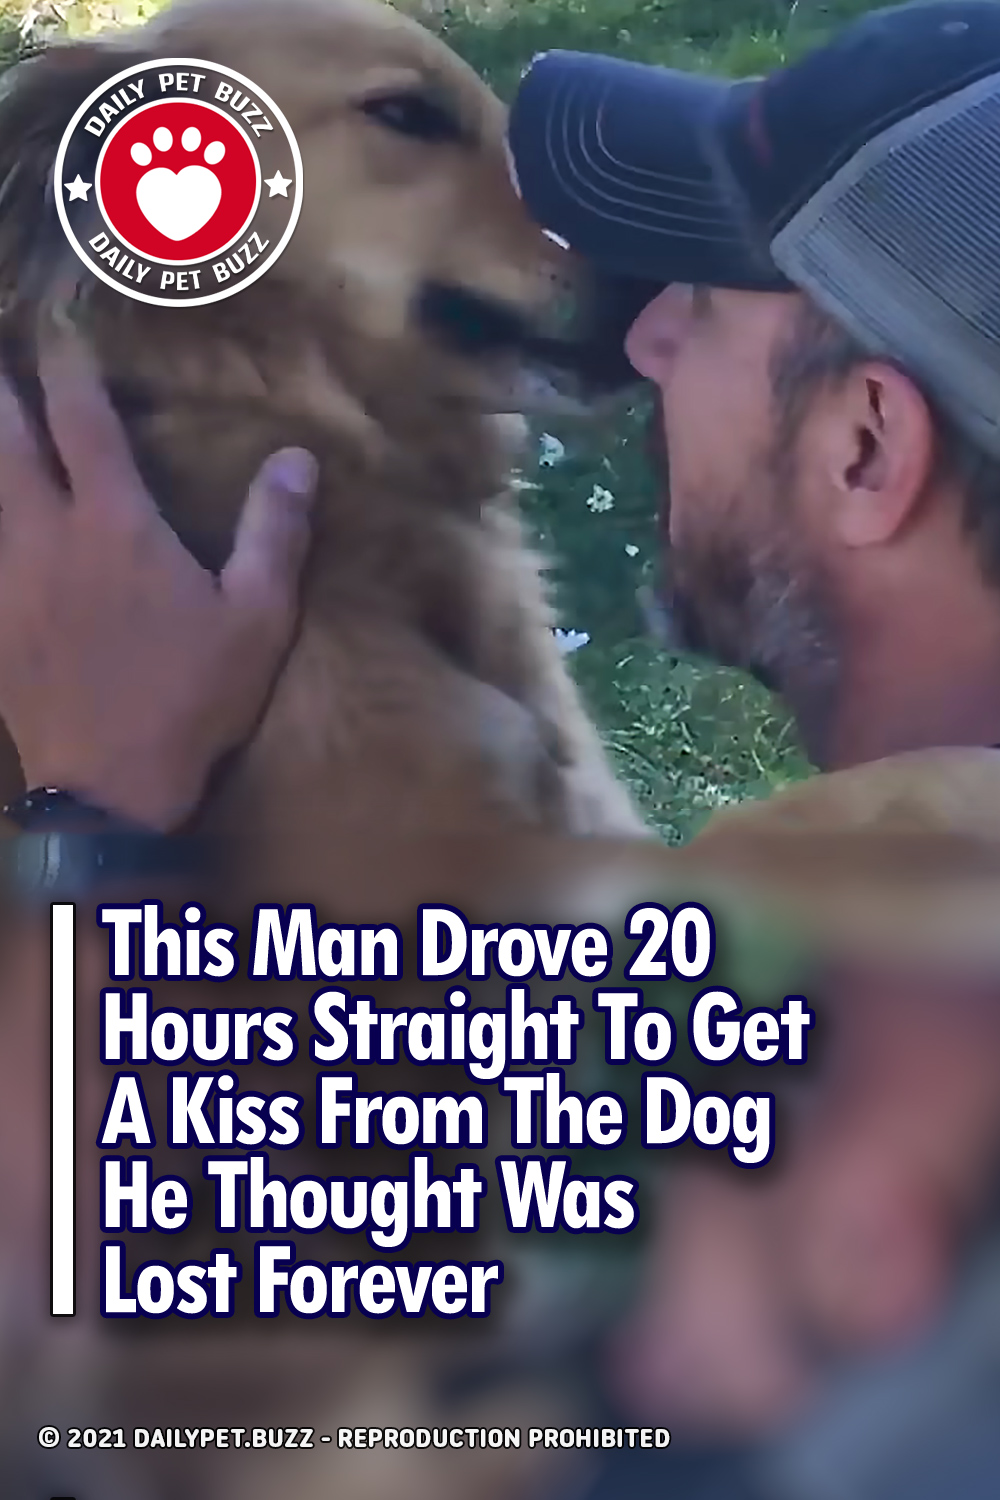 This Man Drove 20 Hours Straight To Get A Kiss From The Dog He Thought Was Lost Forever